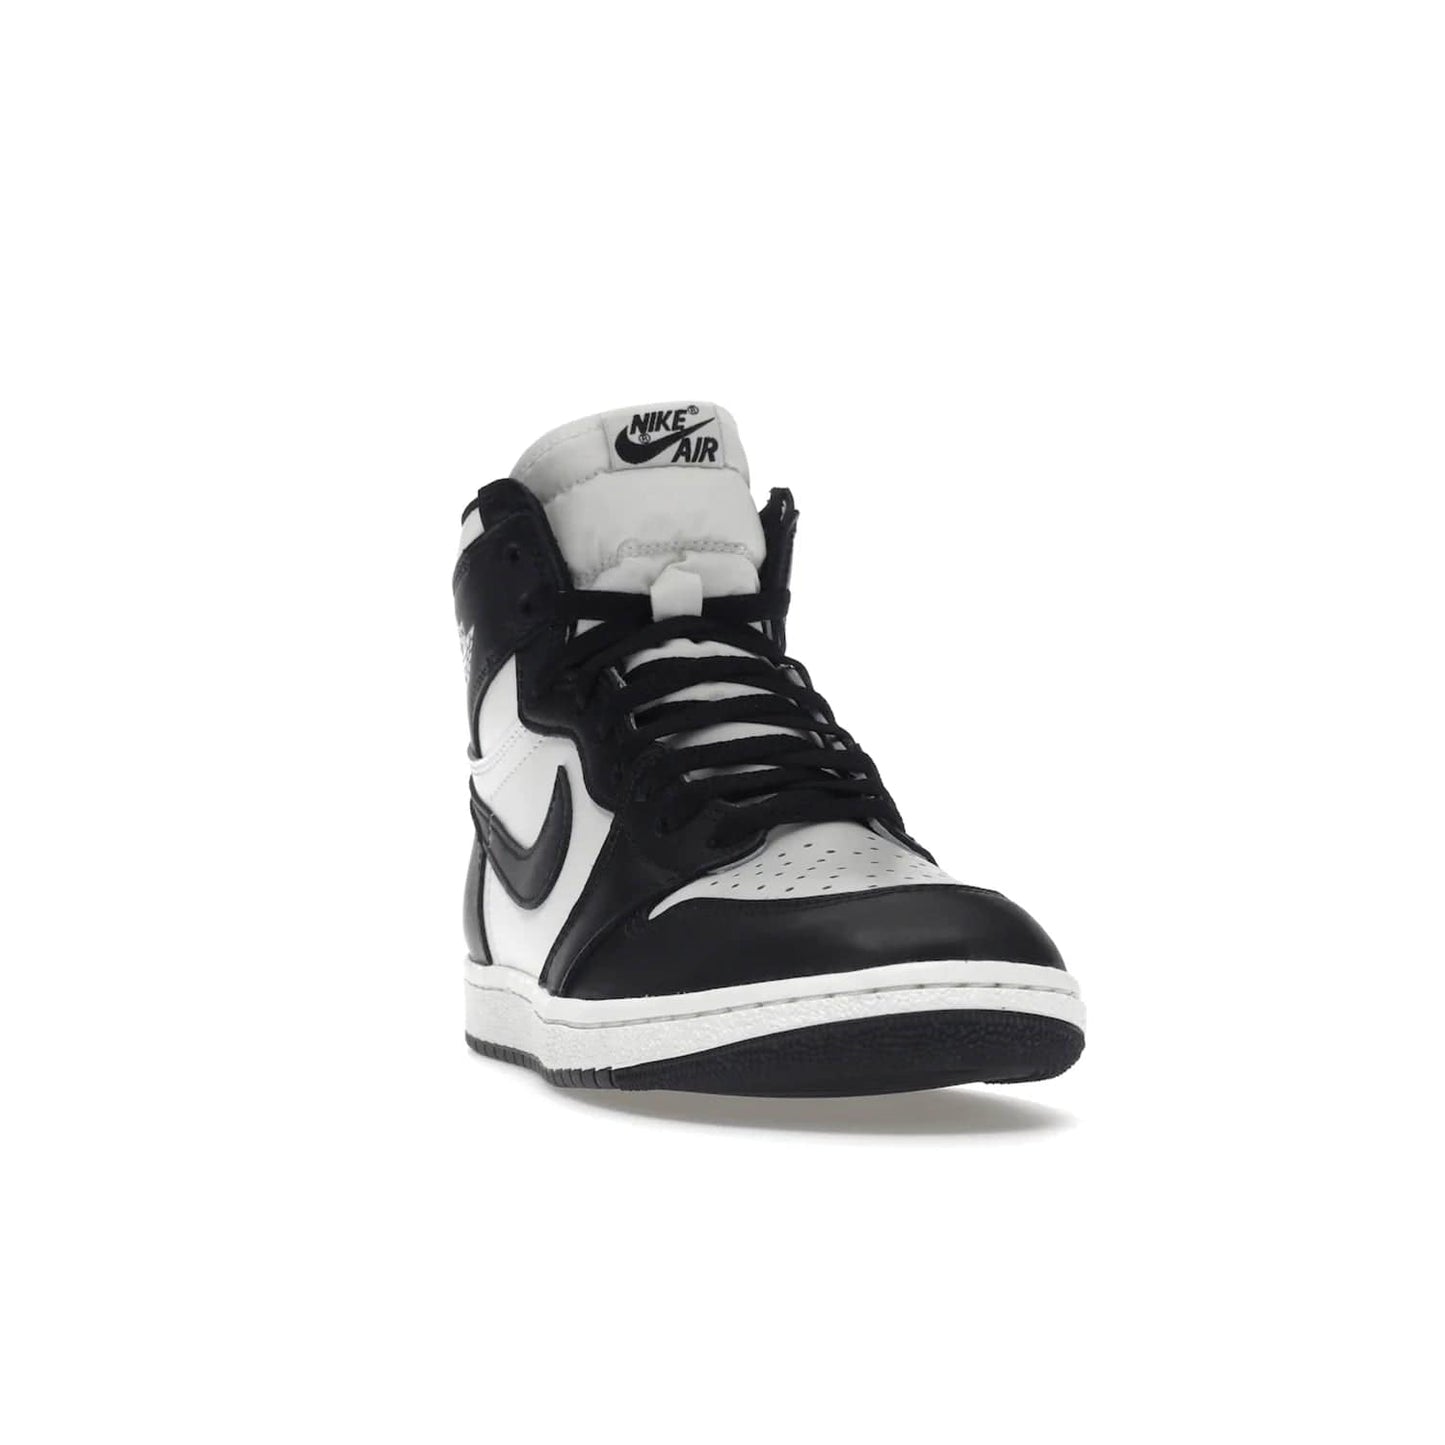 Jordan 1 Retro High 85 Black White (2023) - Image 8 - Only at www.BallersClubKickz.com - Brand new Jordan 1 Retro High 85 Black White (2023) now available. A classic color scheme of black and white leather uppers with signature Nike Air logo on the tongue. Must-have for any Air Jordan fan. Available February 15, 2023.